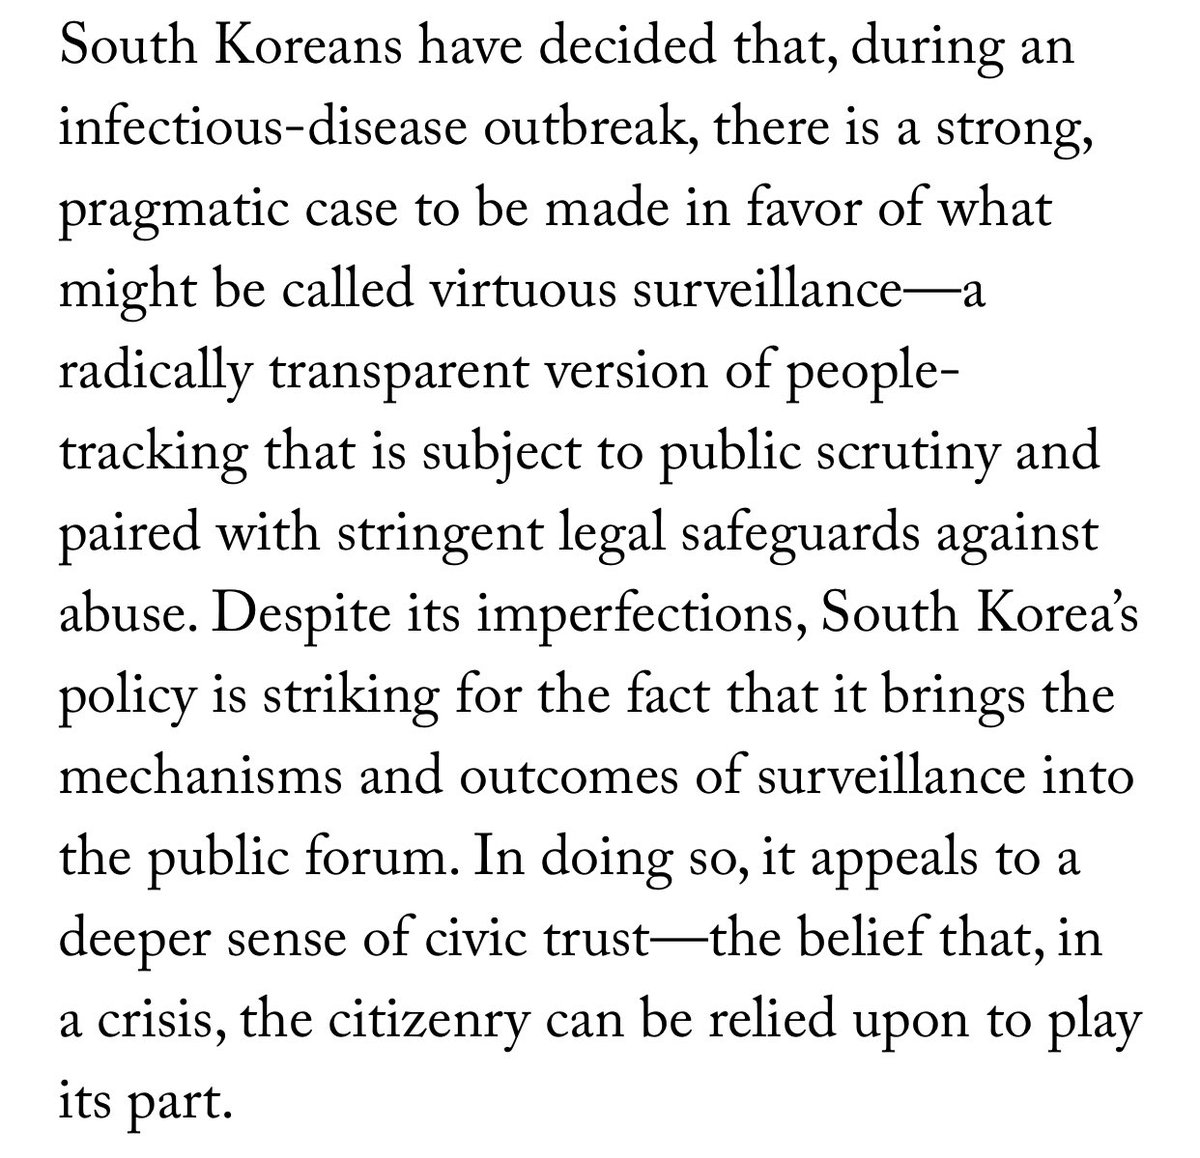 8/ I’ve tweeted about this before- the South Korean digital tracing program, albeit invasive of personal privacy, is one to watch. The screenshot paragraphs below really stuck out to me from this  @NewYorker article.  https://www.newyorker.com/news/news-desk/seouls-radical-experiment-in-digital-contact-tracing